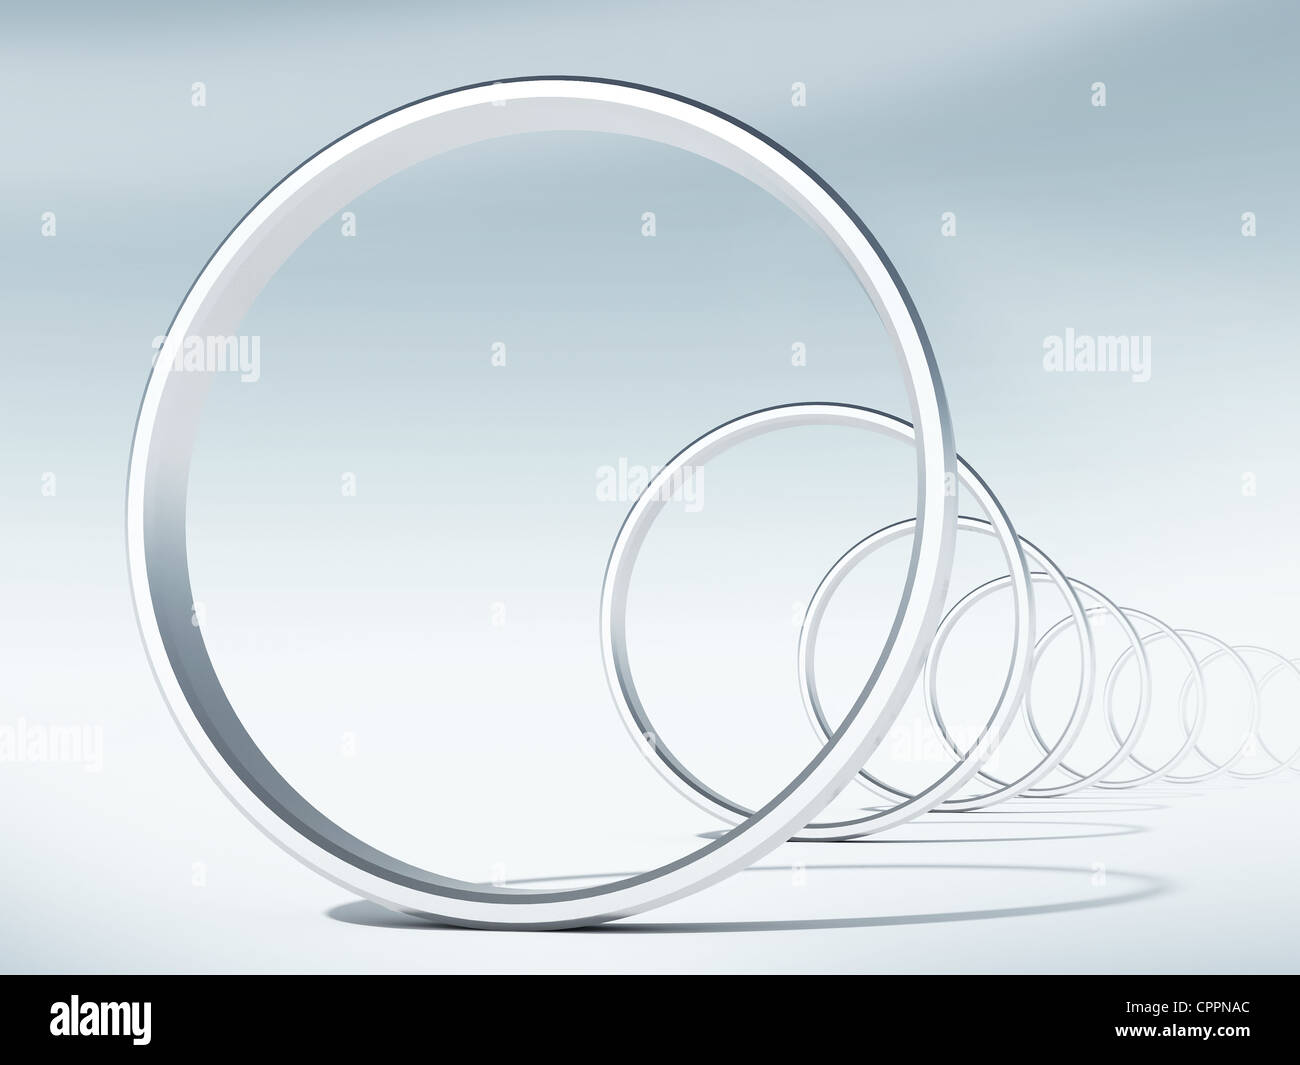 3d render illustration: flight through curved tunnel of rings Stock Photo